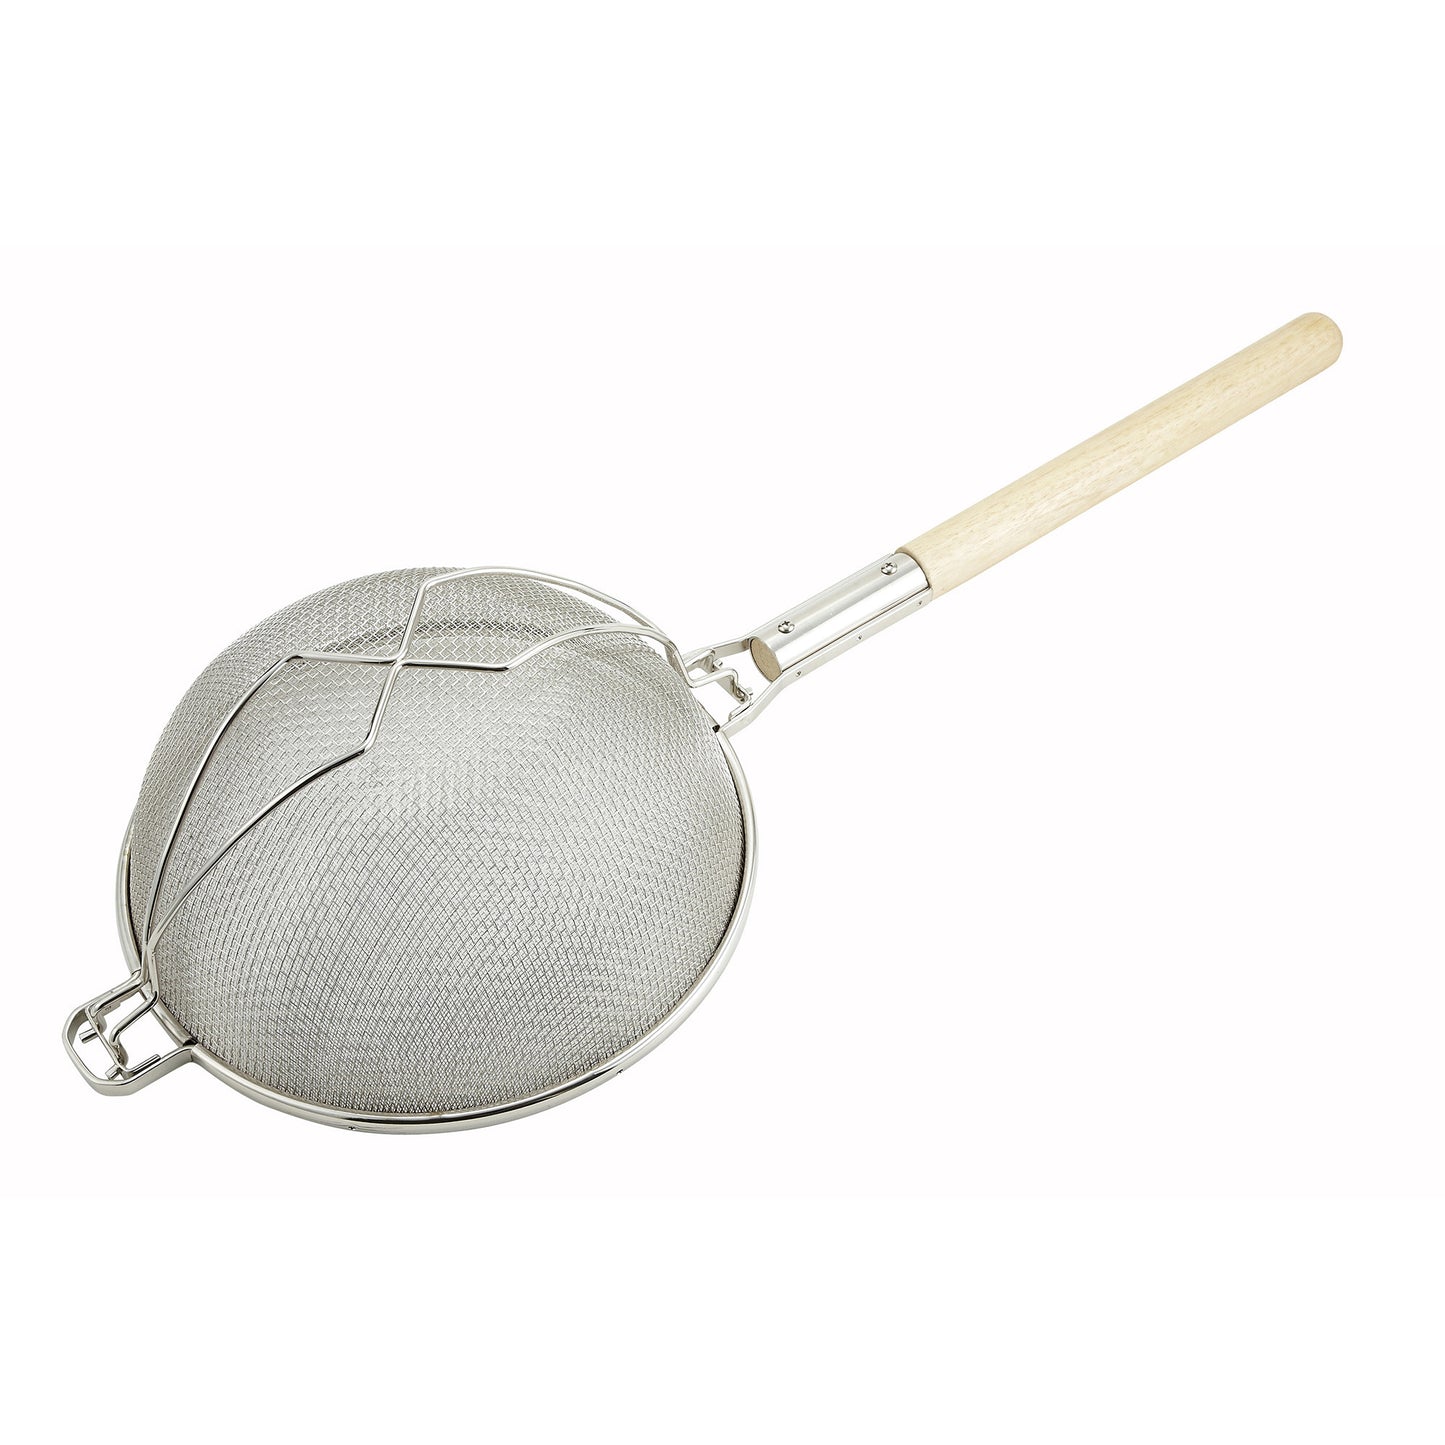 MST-14D - 14" Reinforced Double Mesh Strainer with Round Handle